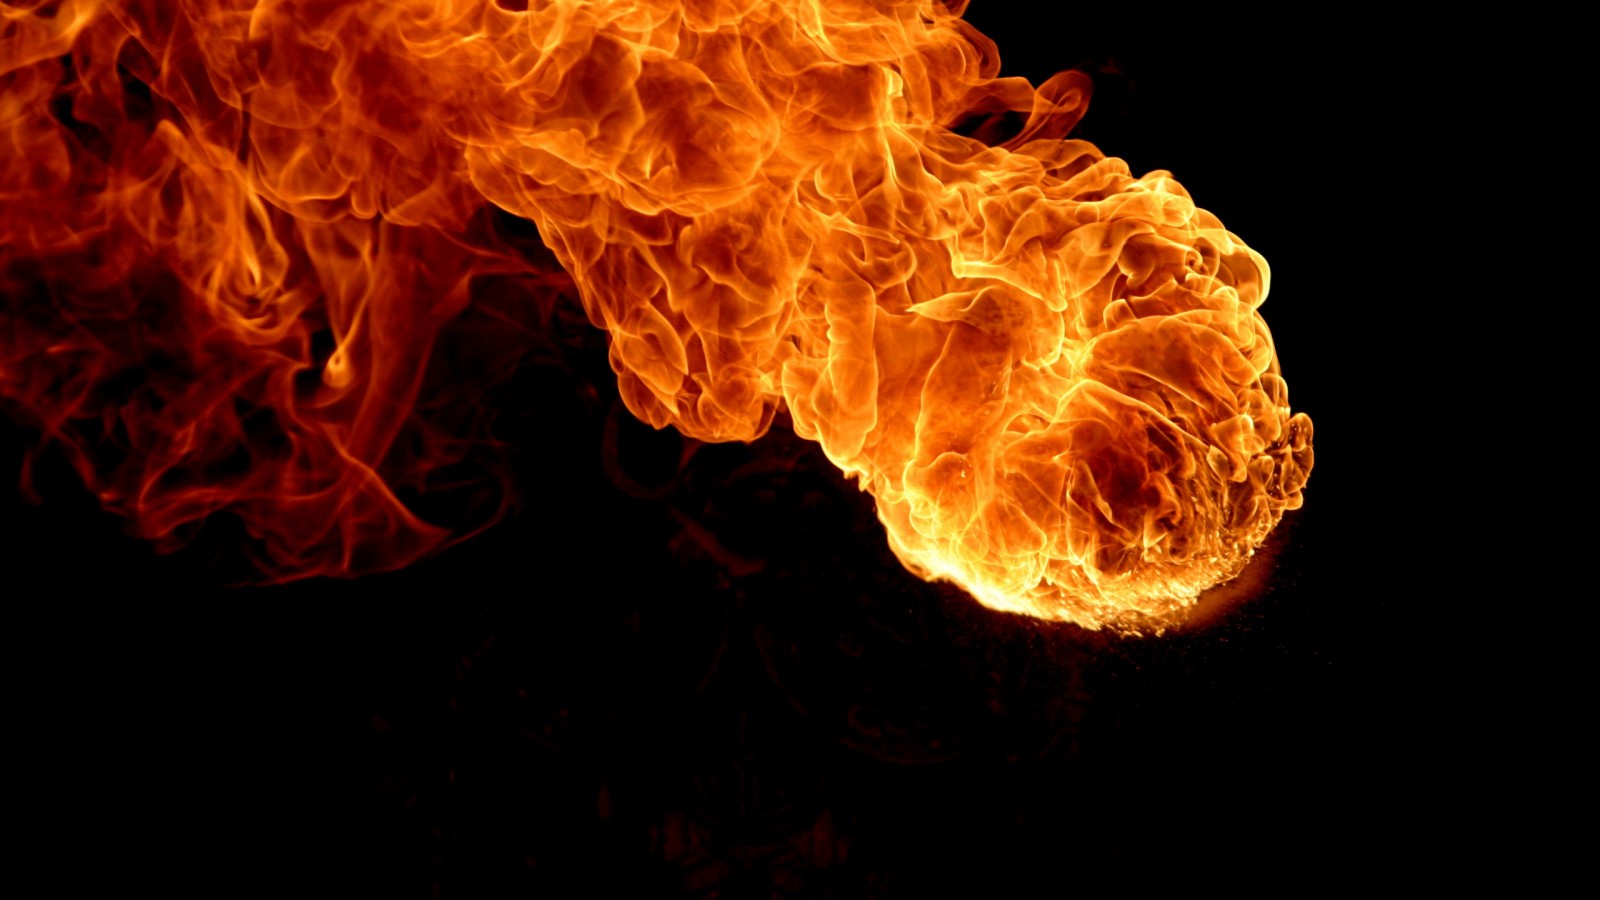 fire hd 4k background wallpapers download 3D